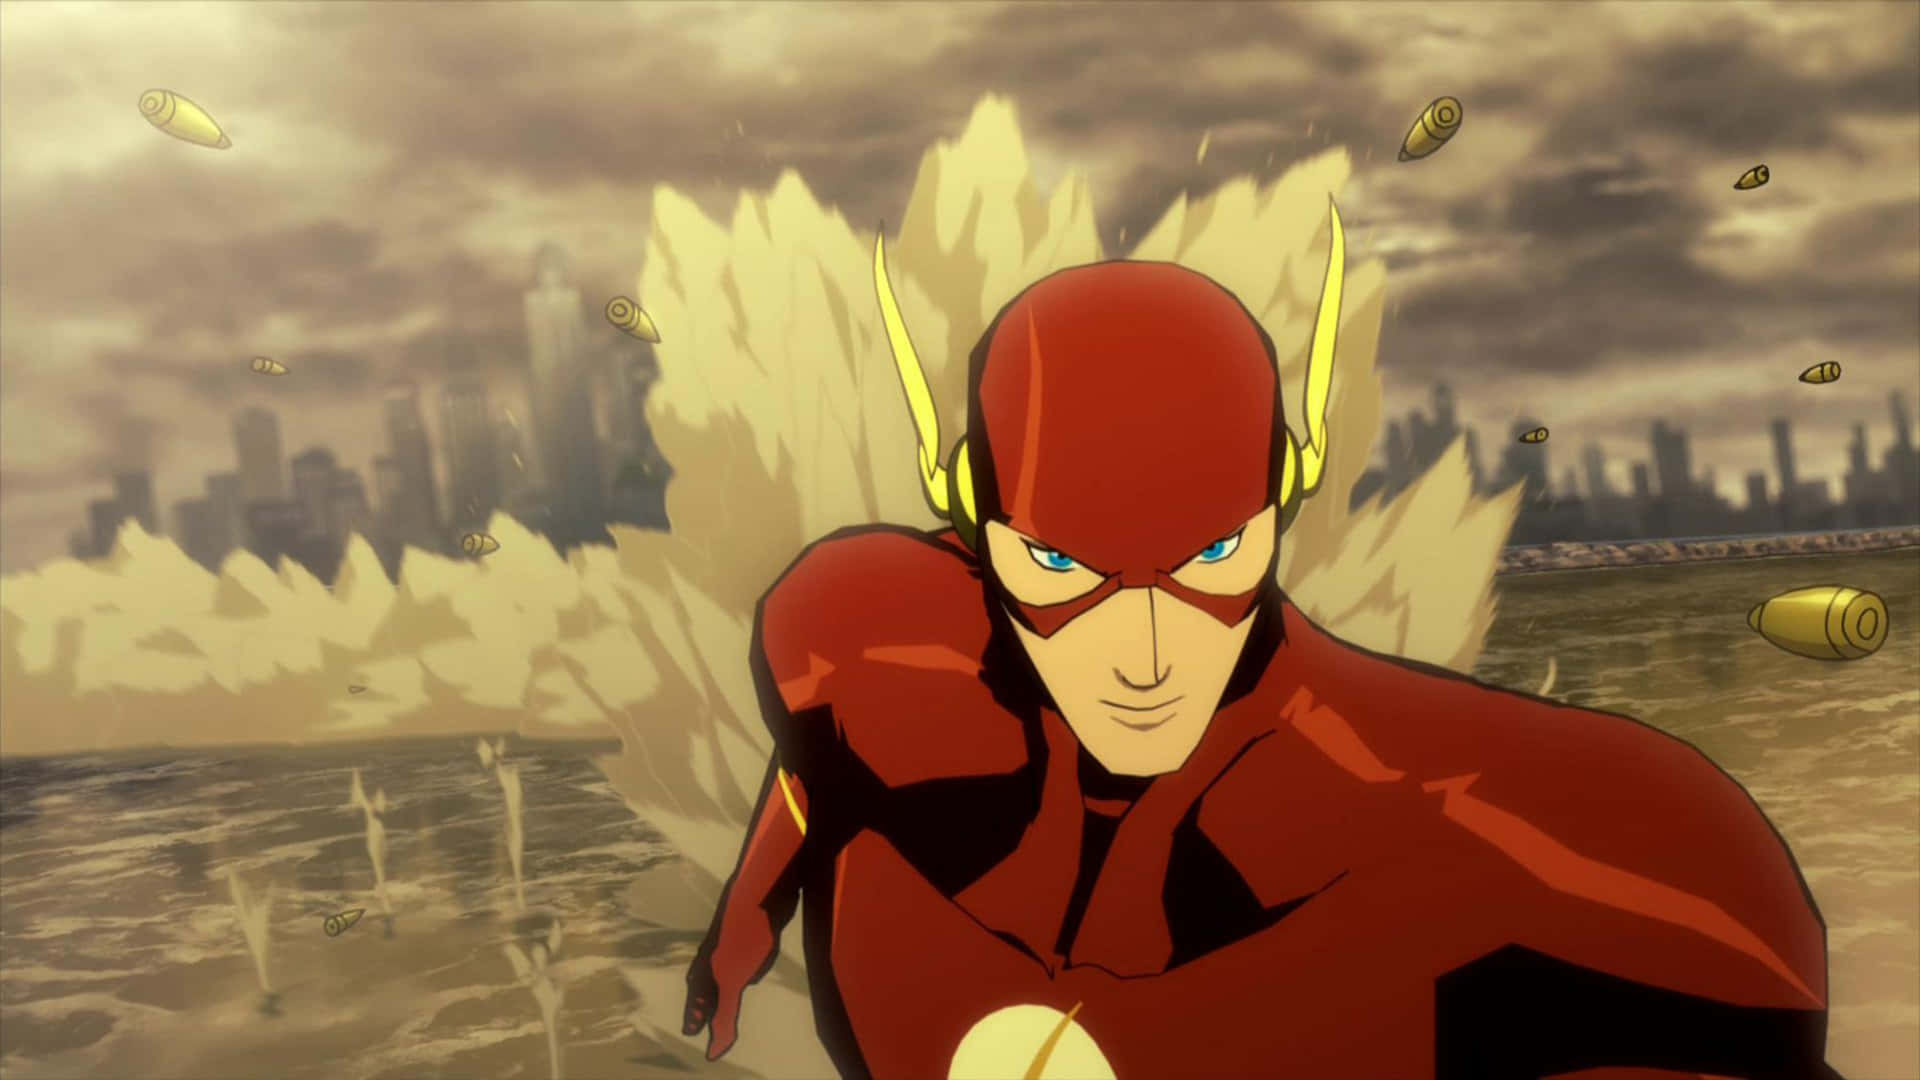 The Flash and his Justice League team members face an alternate reality in The Flashpoint Paradox. Wallpaper